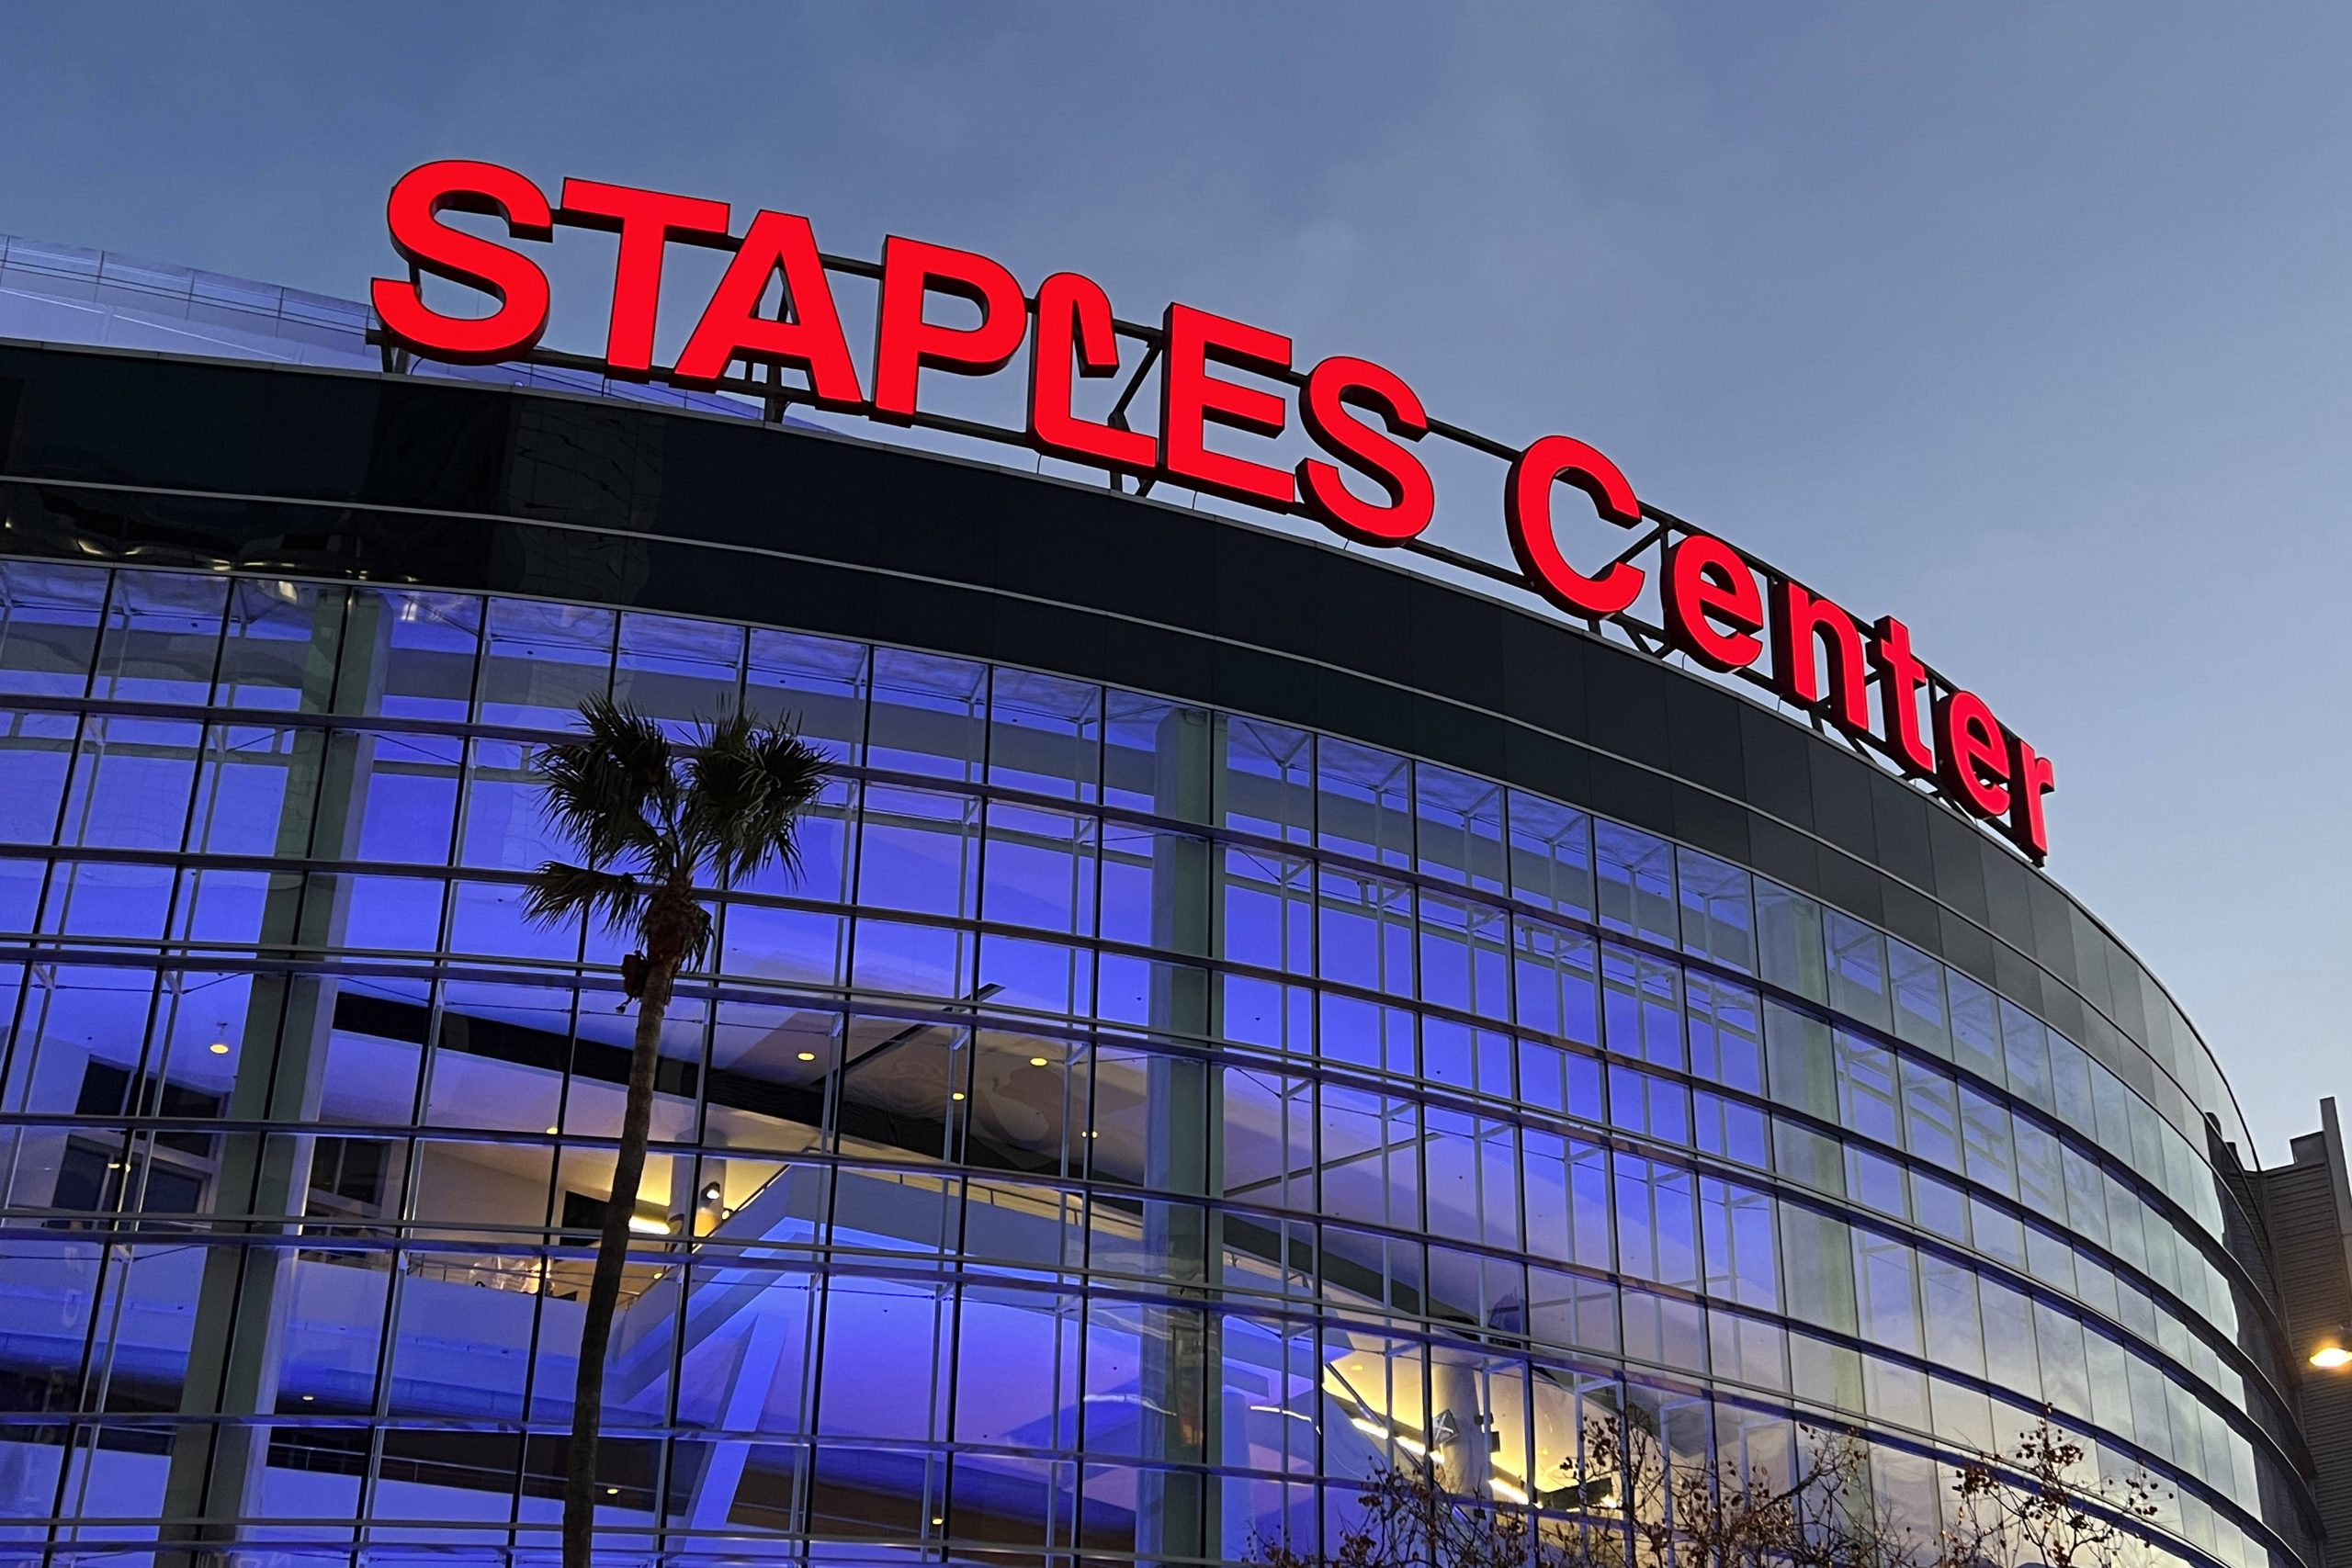 Lakers go big with tributes to the end of Staples Center